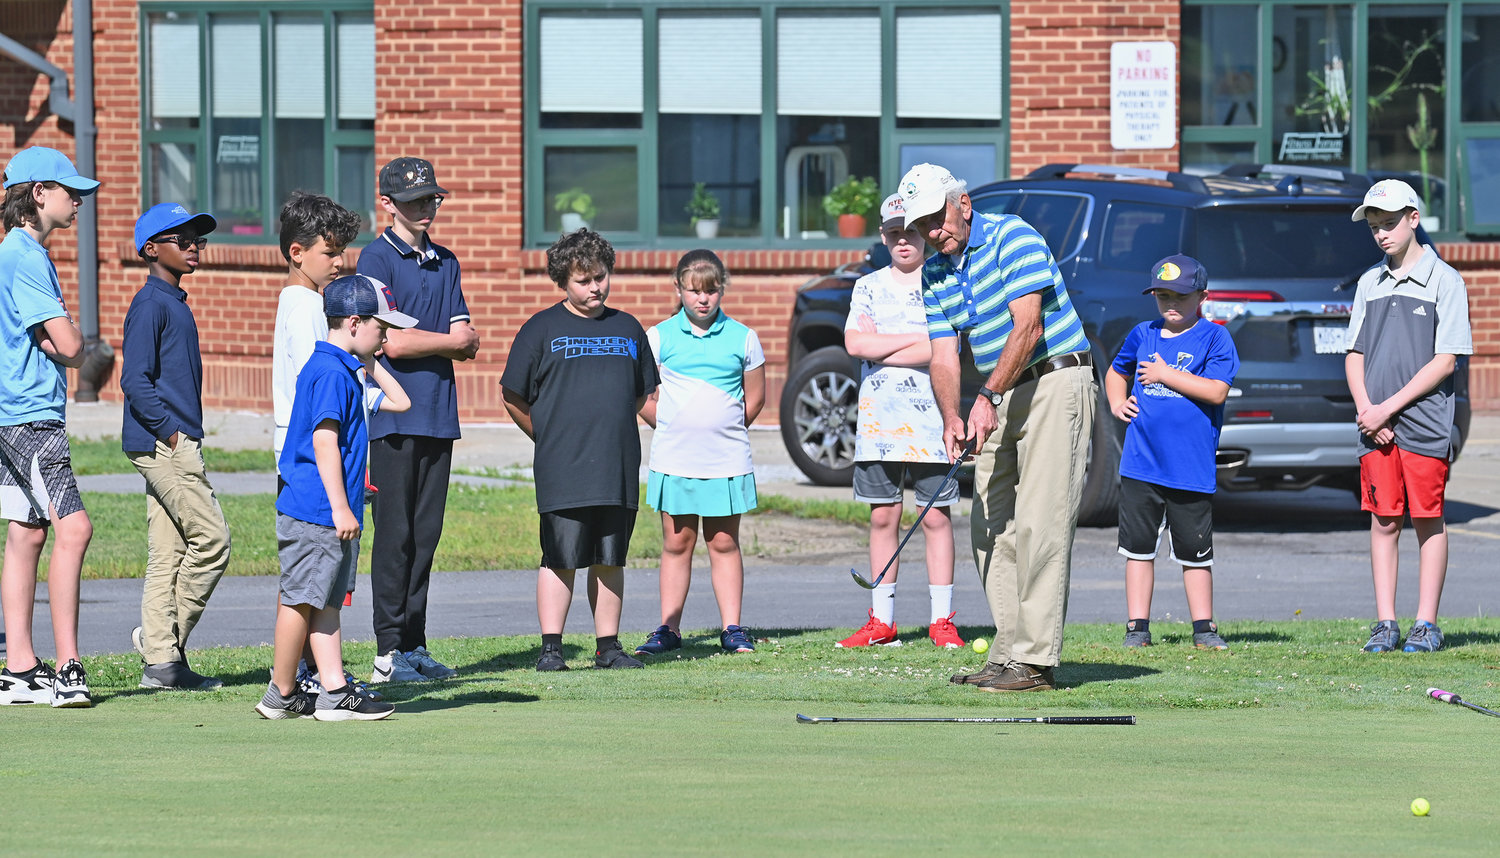 HOW TO CHIP — Golf instructor Paul Panek teaches a group of children how to chip during their second lesson on the Mohawk Glen practice green Wednesday. This is Panek’s 24th year of teaching the summer program.